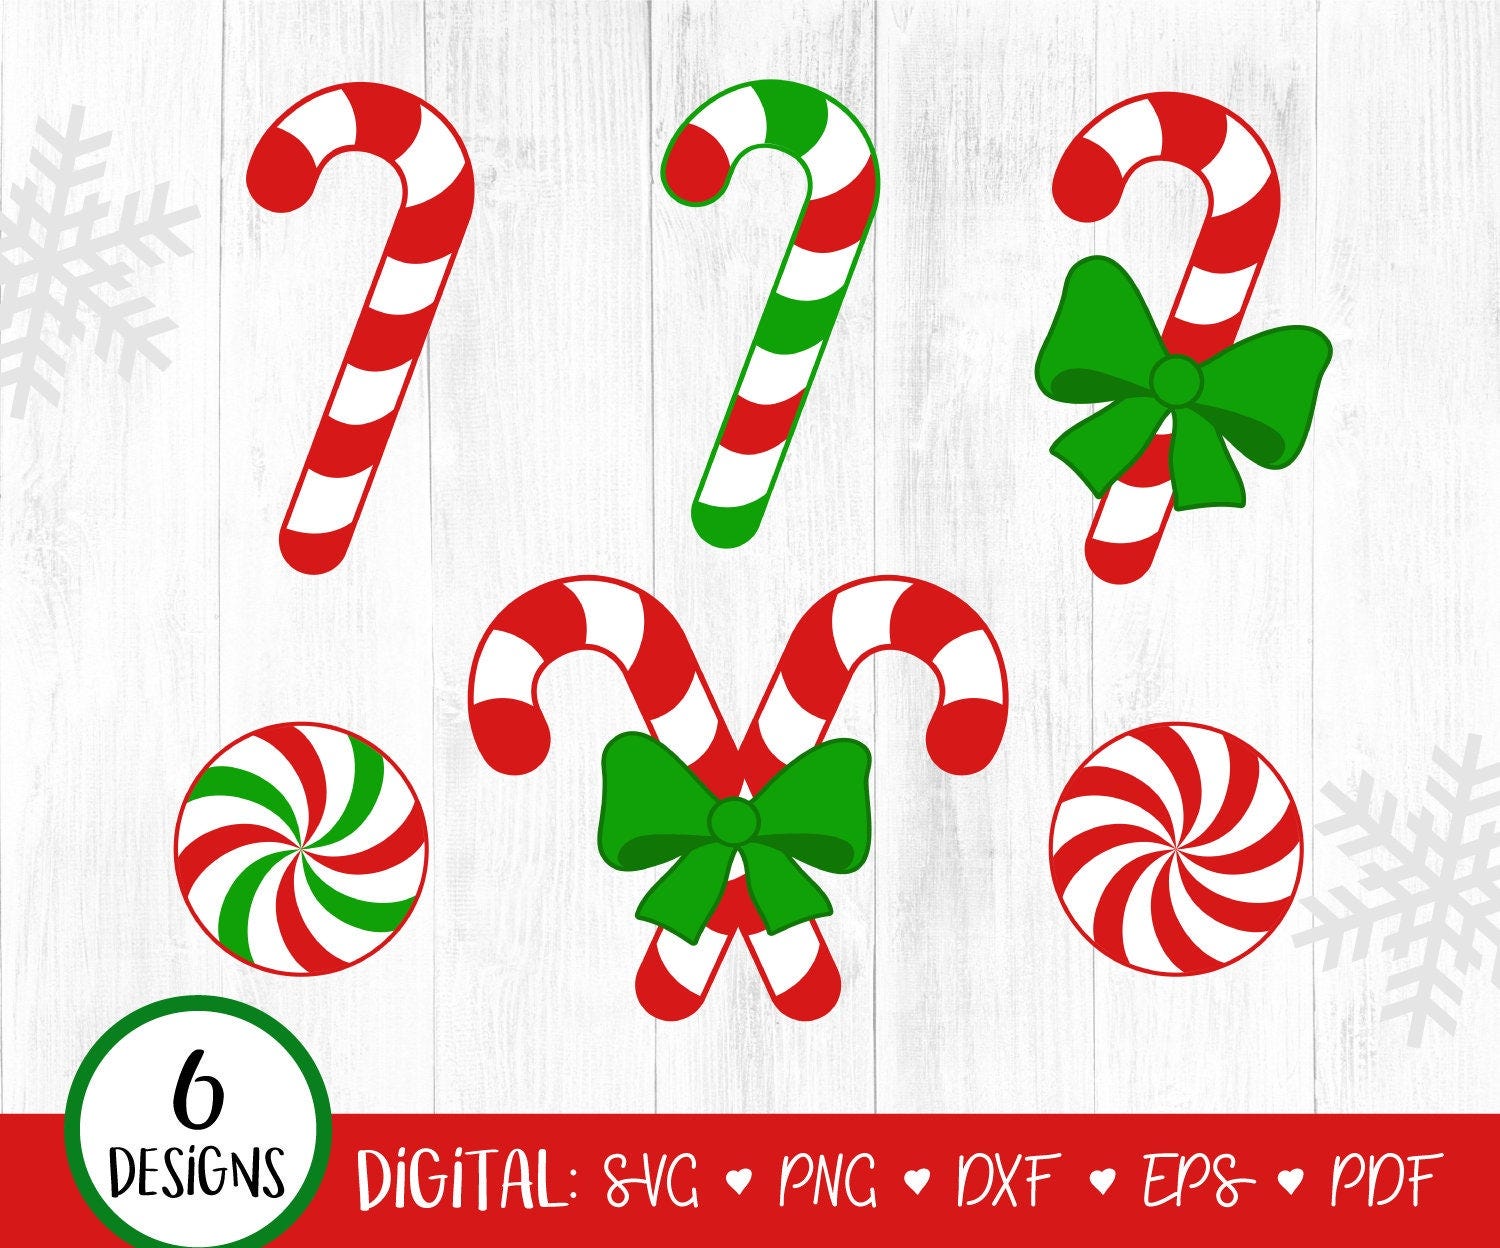 Candy Cane SVG, Candy Canes Clipart, Candy Cane with Bow, Christmas SVG Clipart, Sweets, Candy, Holiday, Mints, Peppermint, PNG, dxf, eps